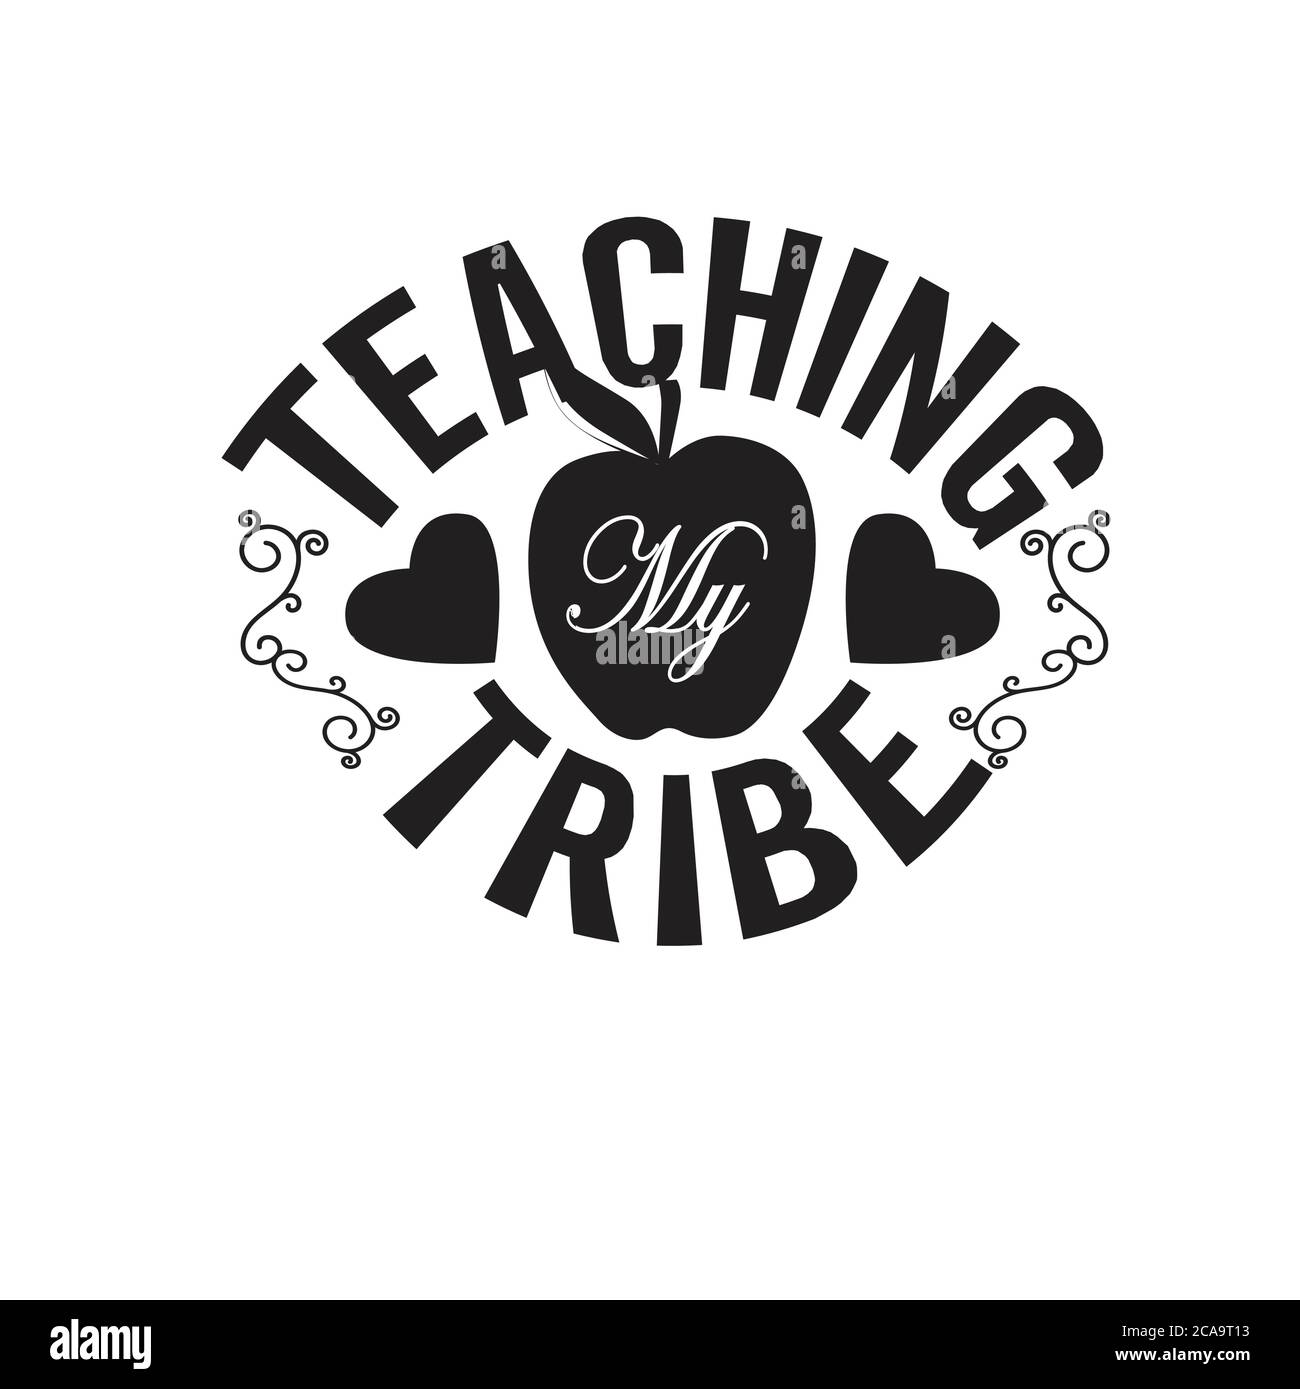 Teachers Quotes and Slogan good for Tee. Teaching My Tribe. Stock Vector